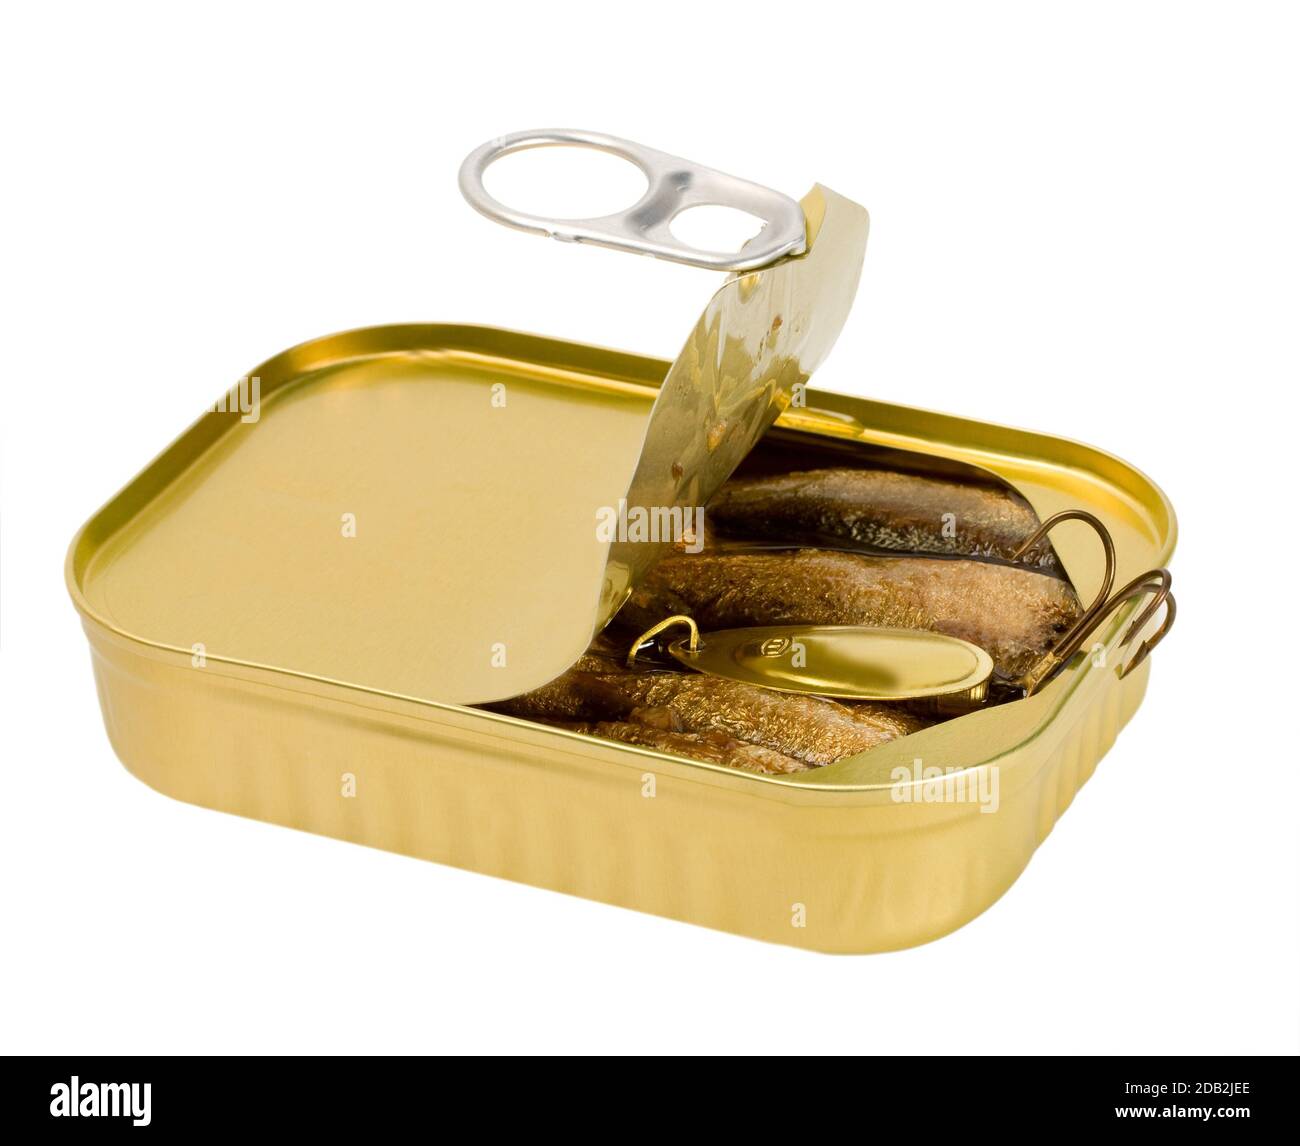 fish bait in open sardine can isolated on white background Stock Photo